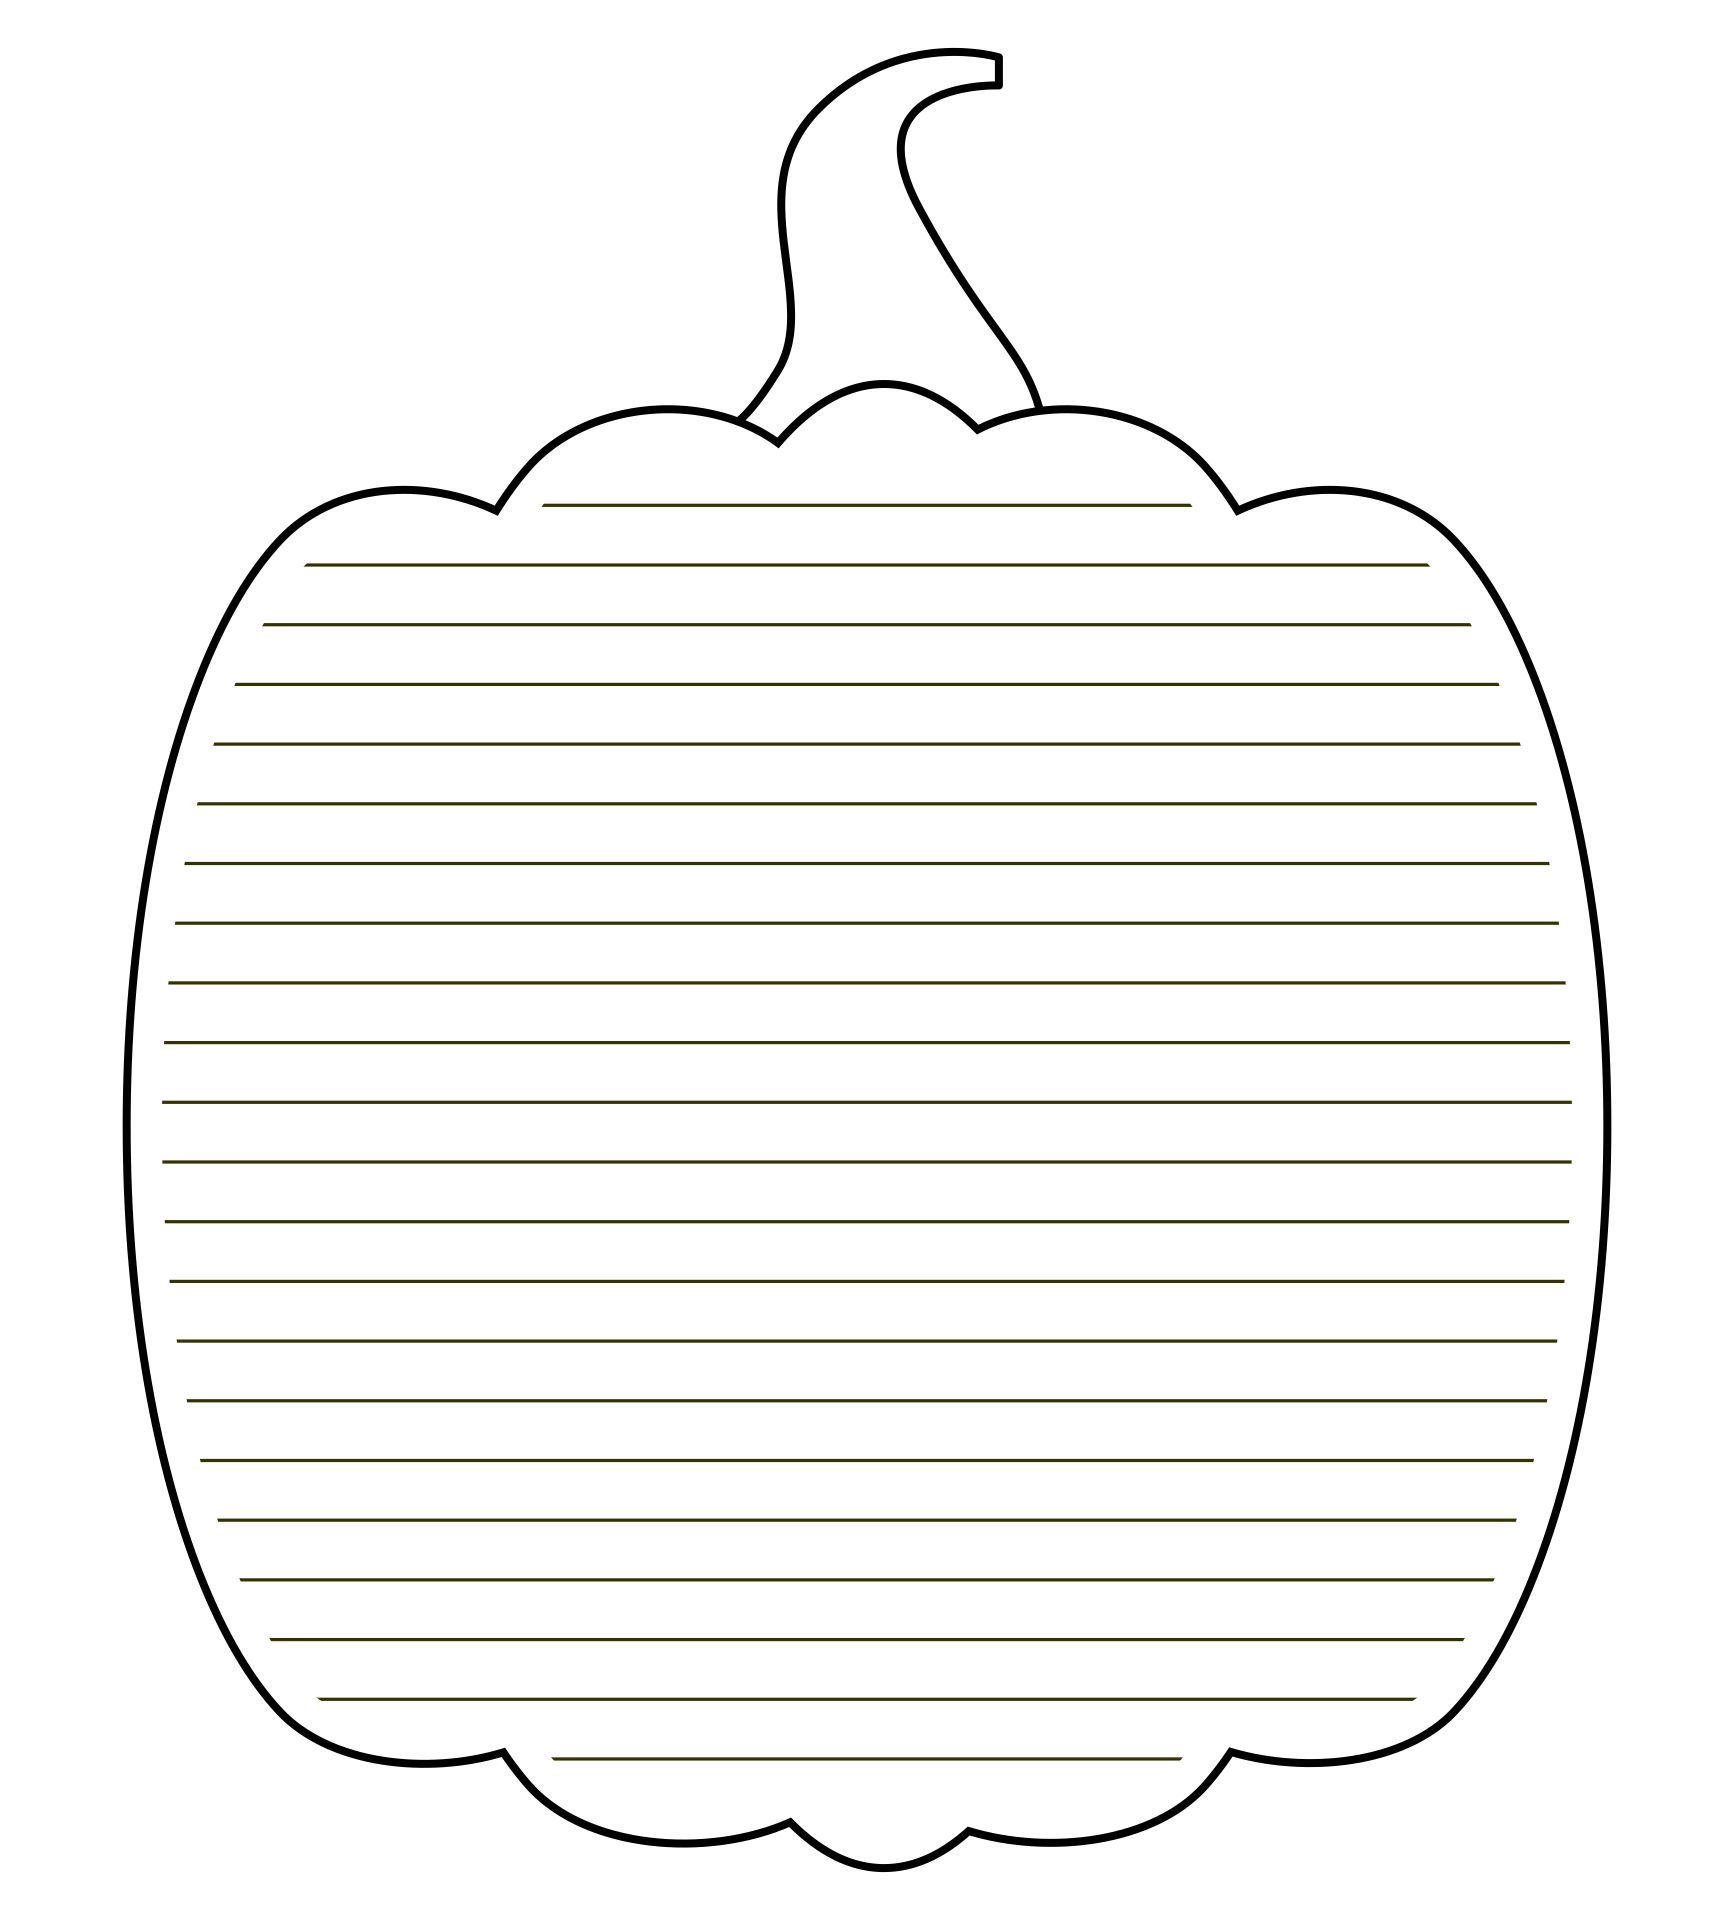 Pumpkin Writing Paper with Lines